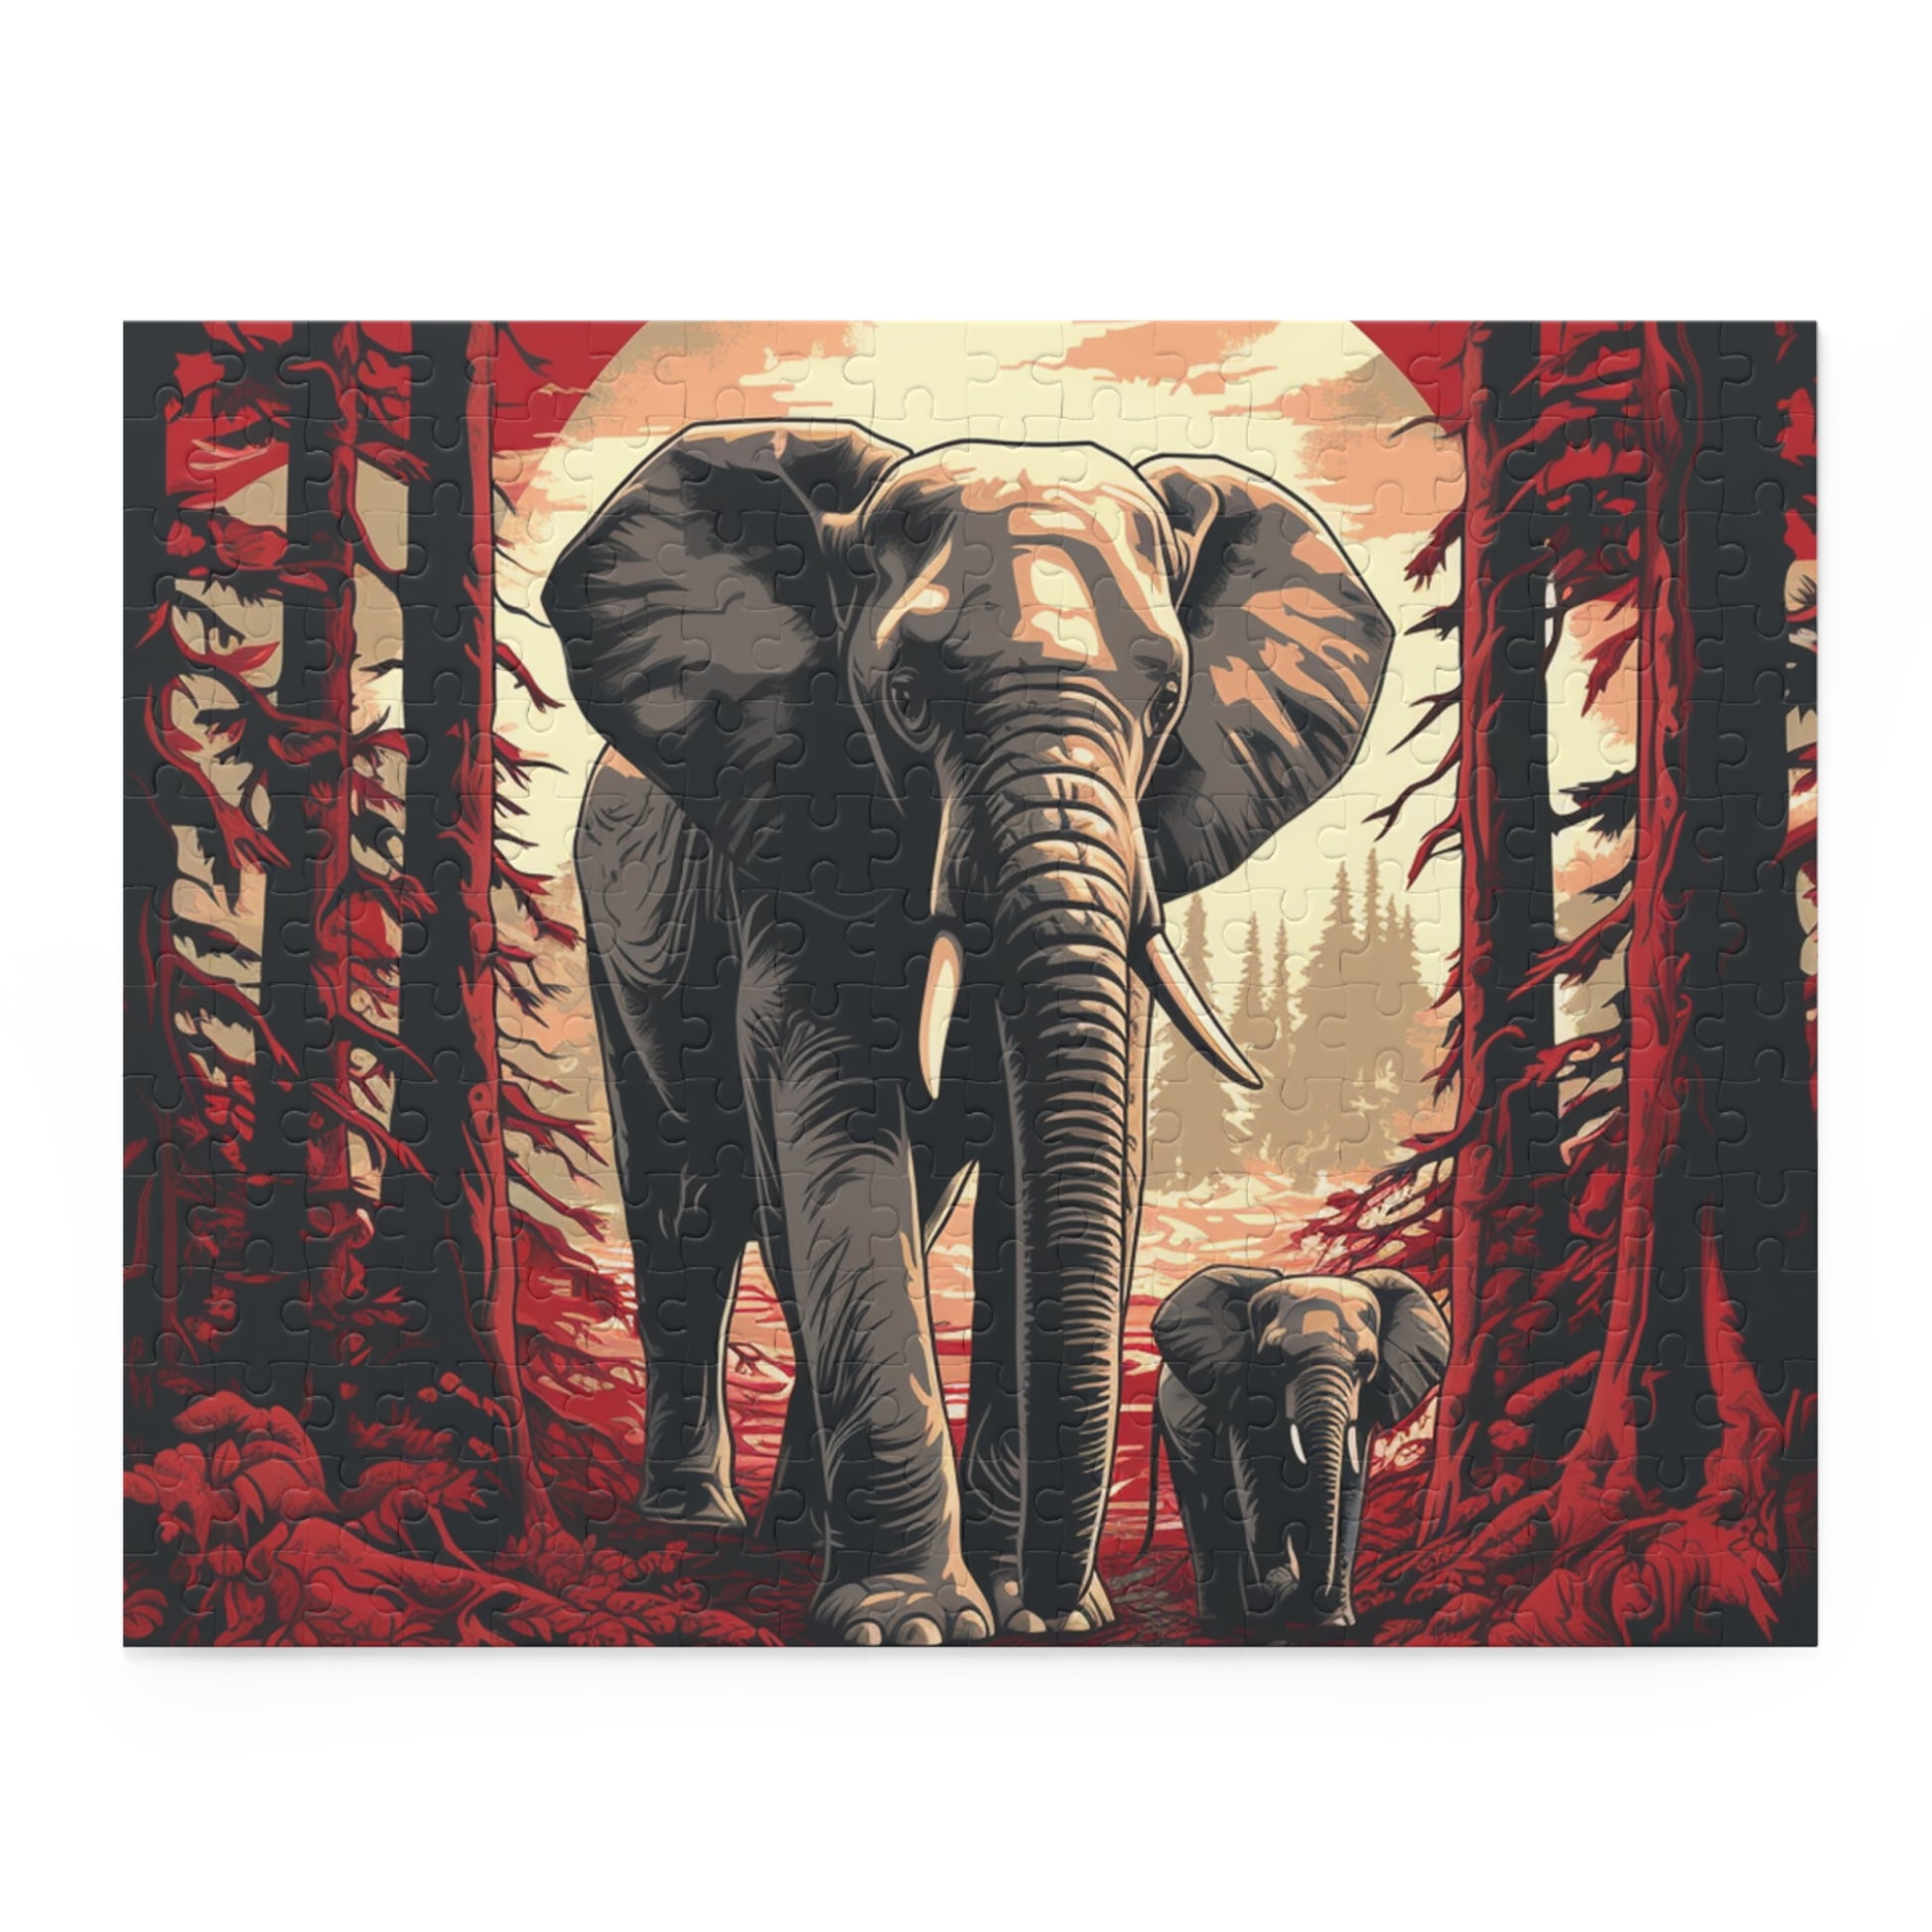 Vibrant Abstract Elephant Jigsaw Puzzle for Boys, Girls, Kids Adult Birthday Business Jigsaw Puzzle Gift for Him Funny Humorous Indoor Outdoor Game Gift For Her Online-3